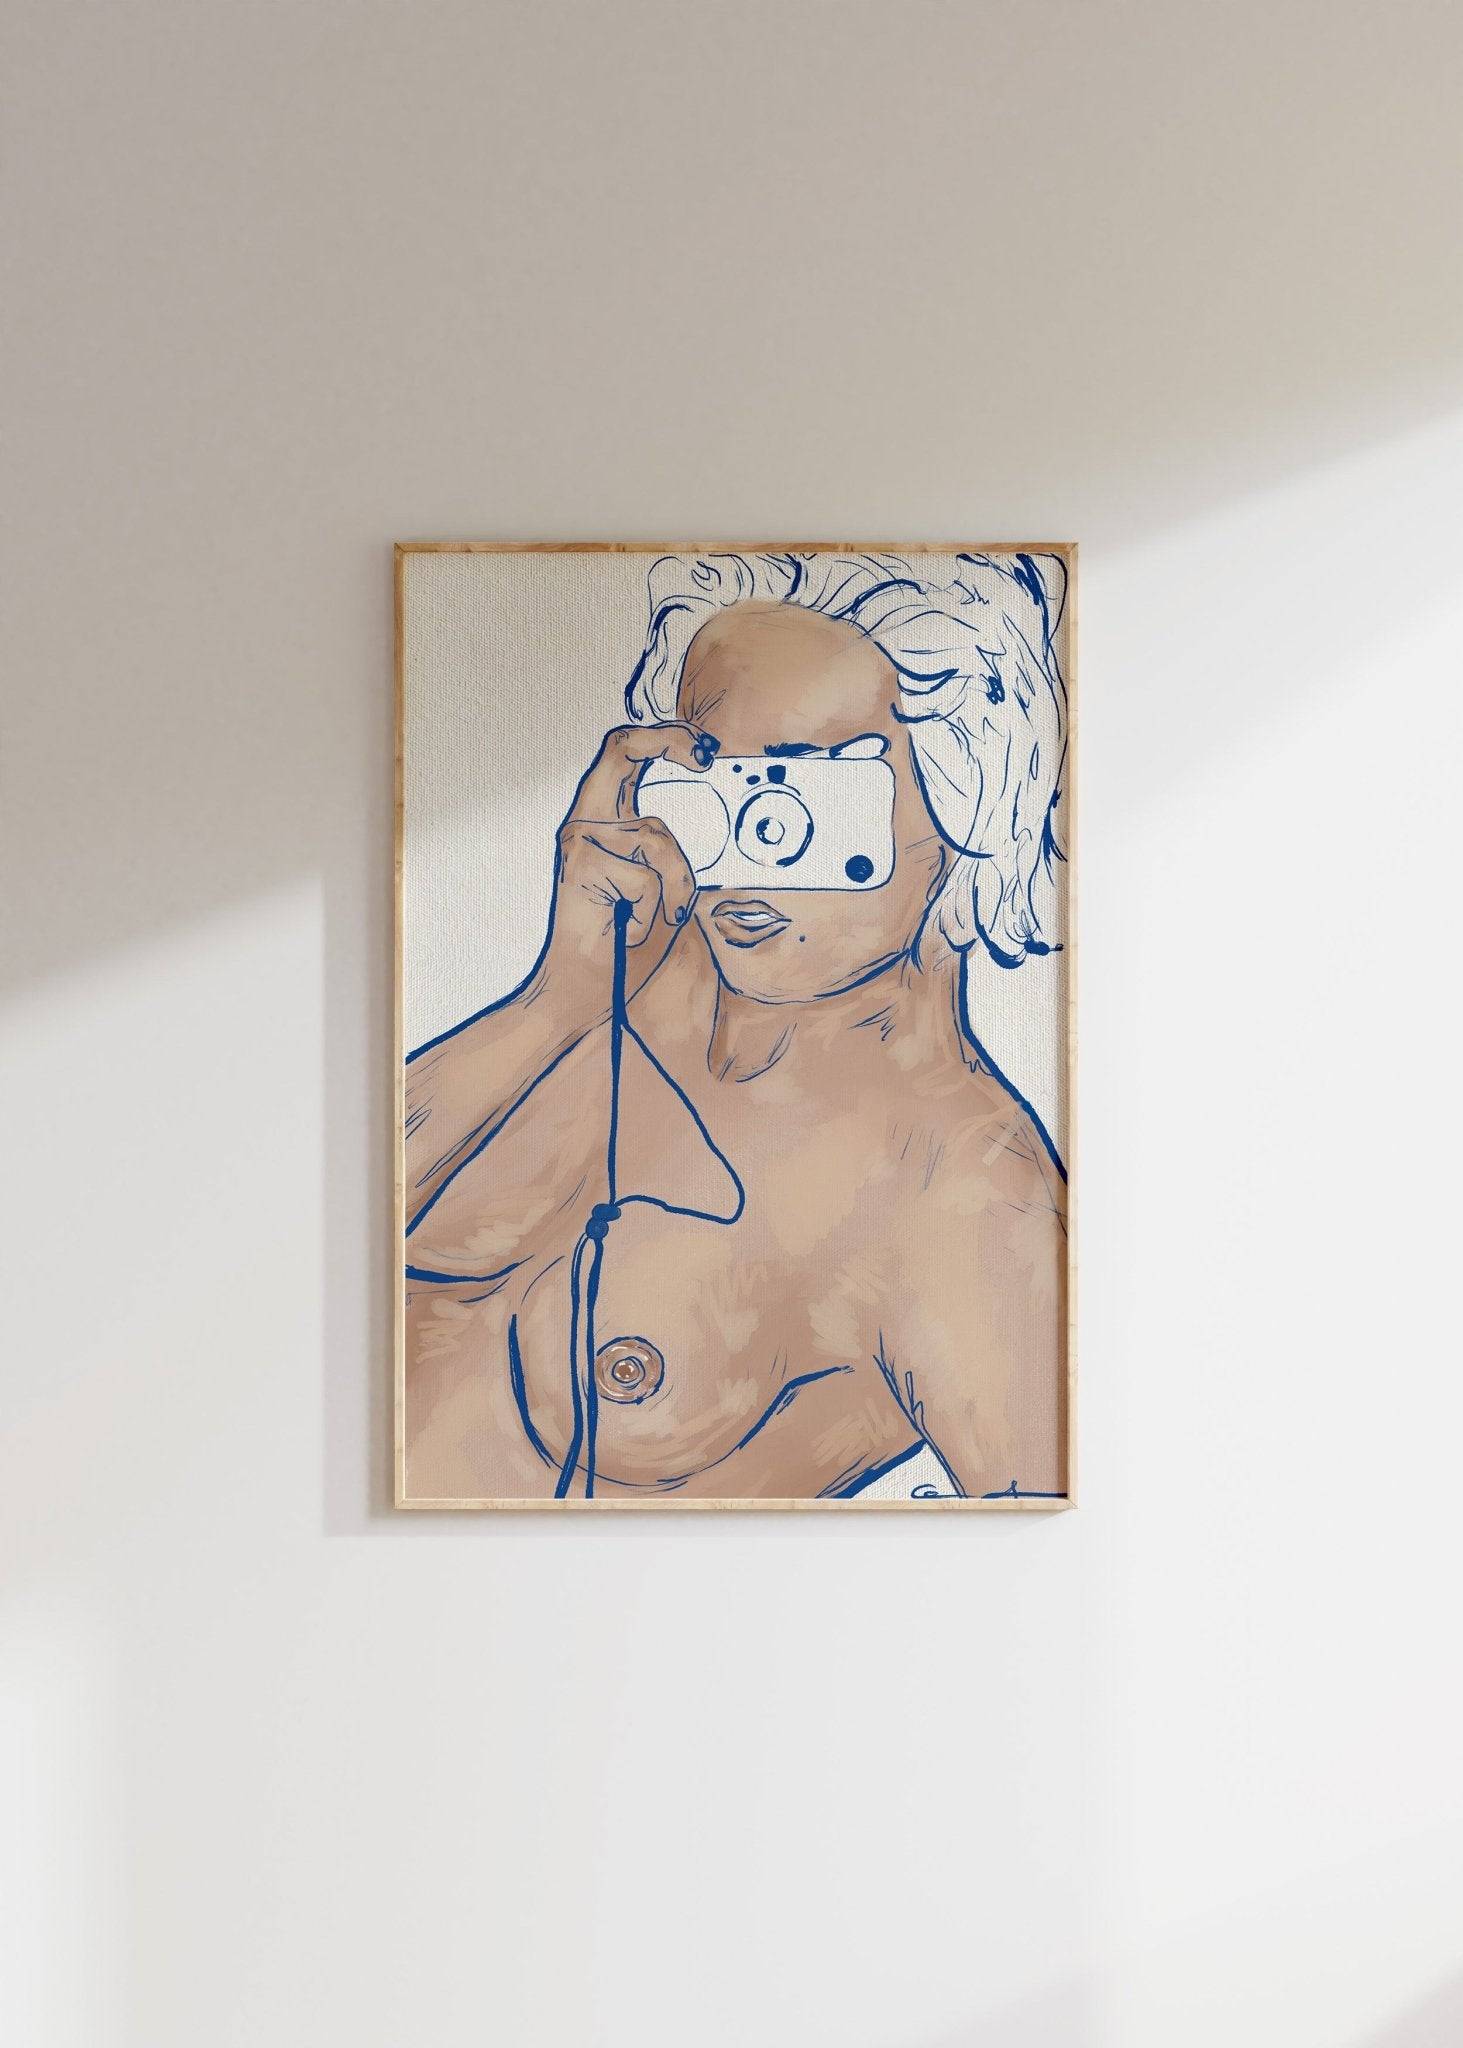 a painting of a nude woman is hanging on a wall